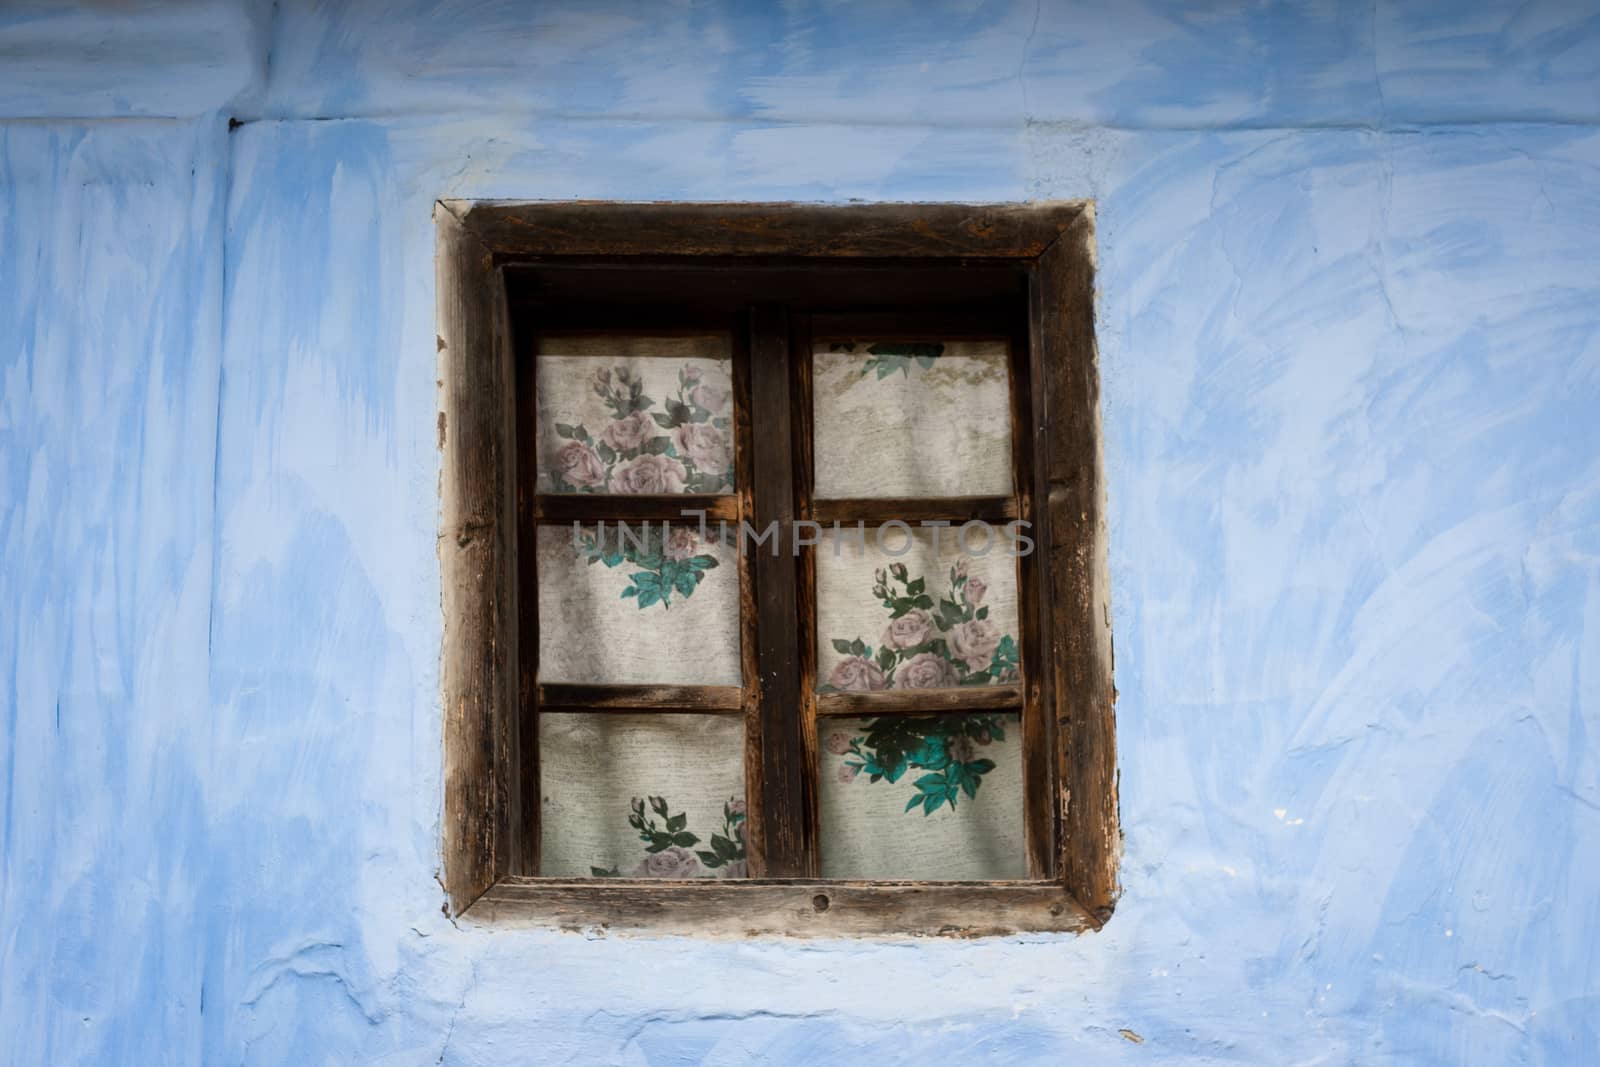 vintage, old brown wooden window on blue wall